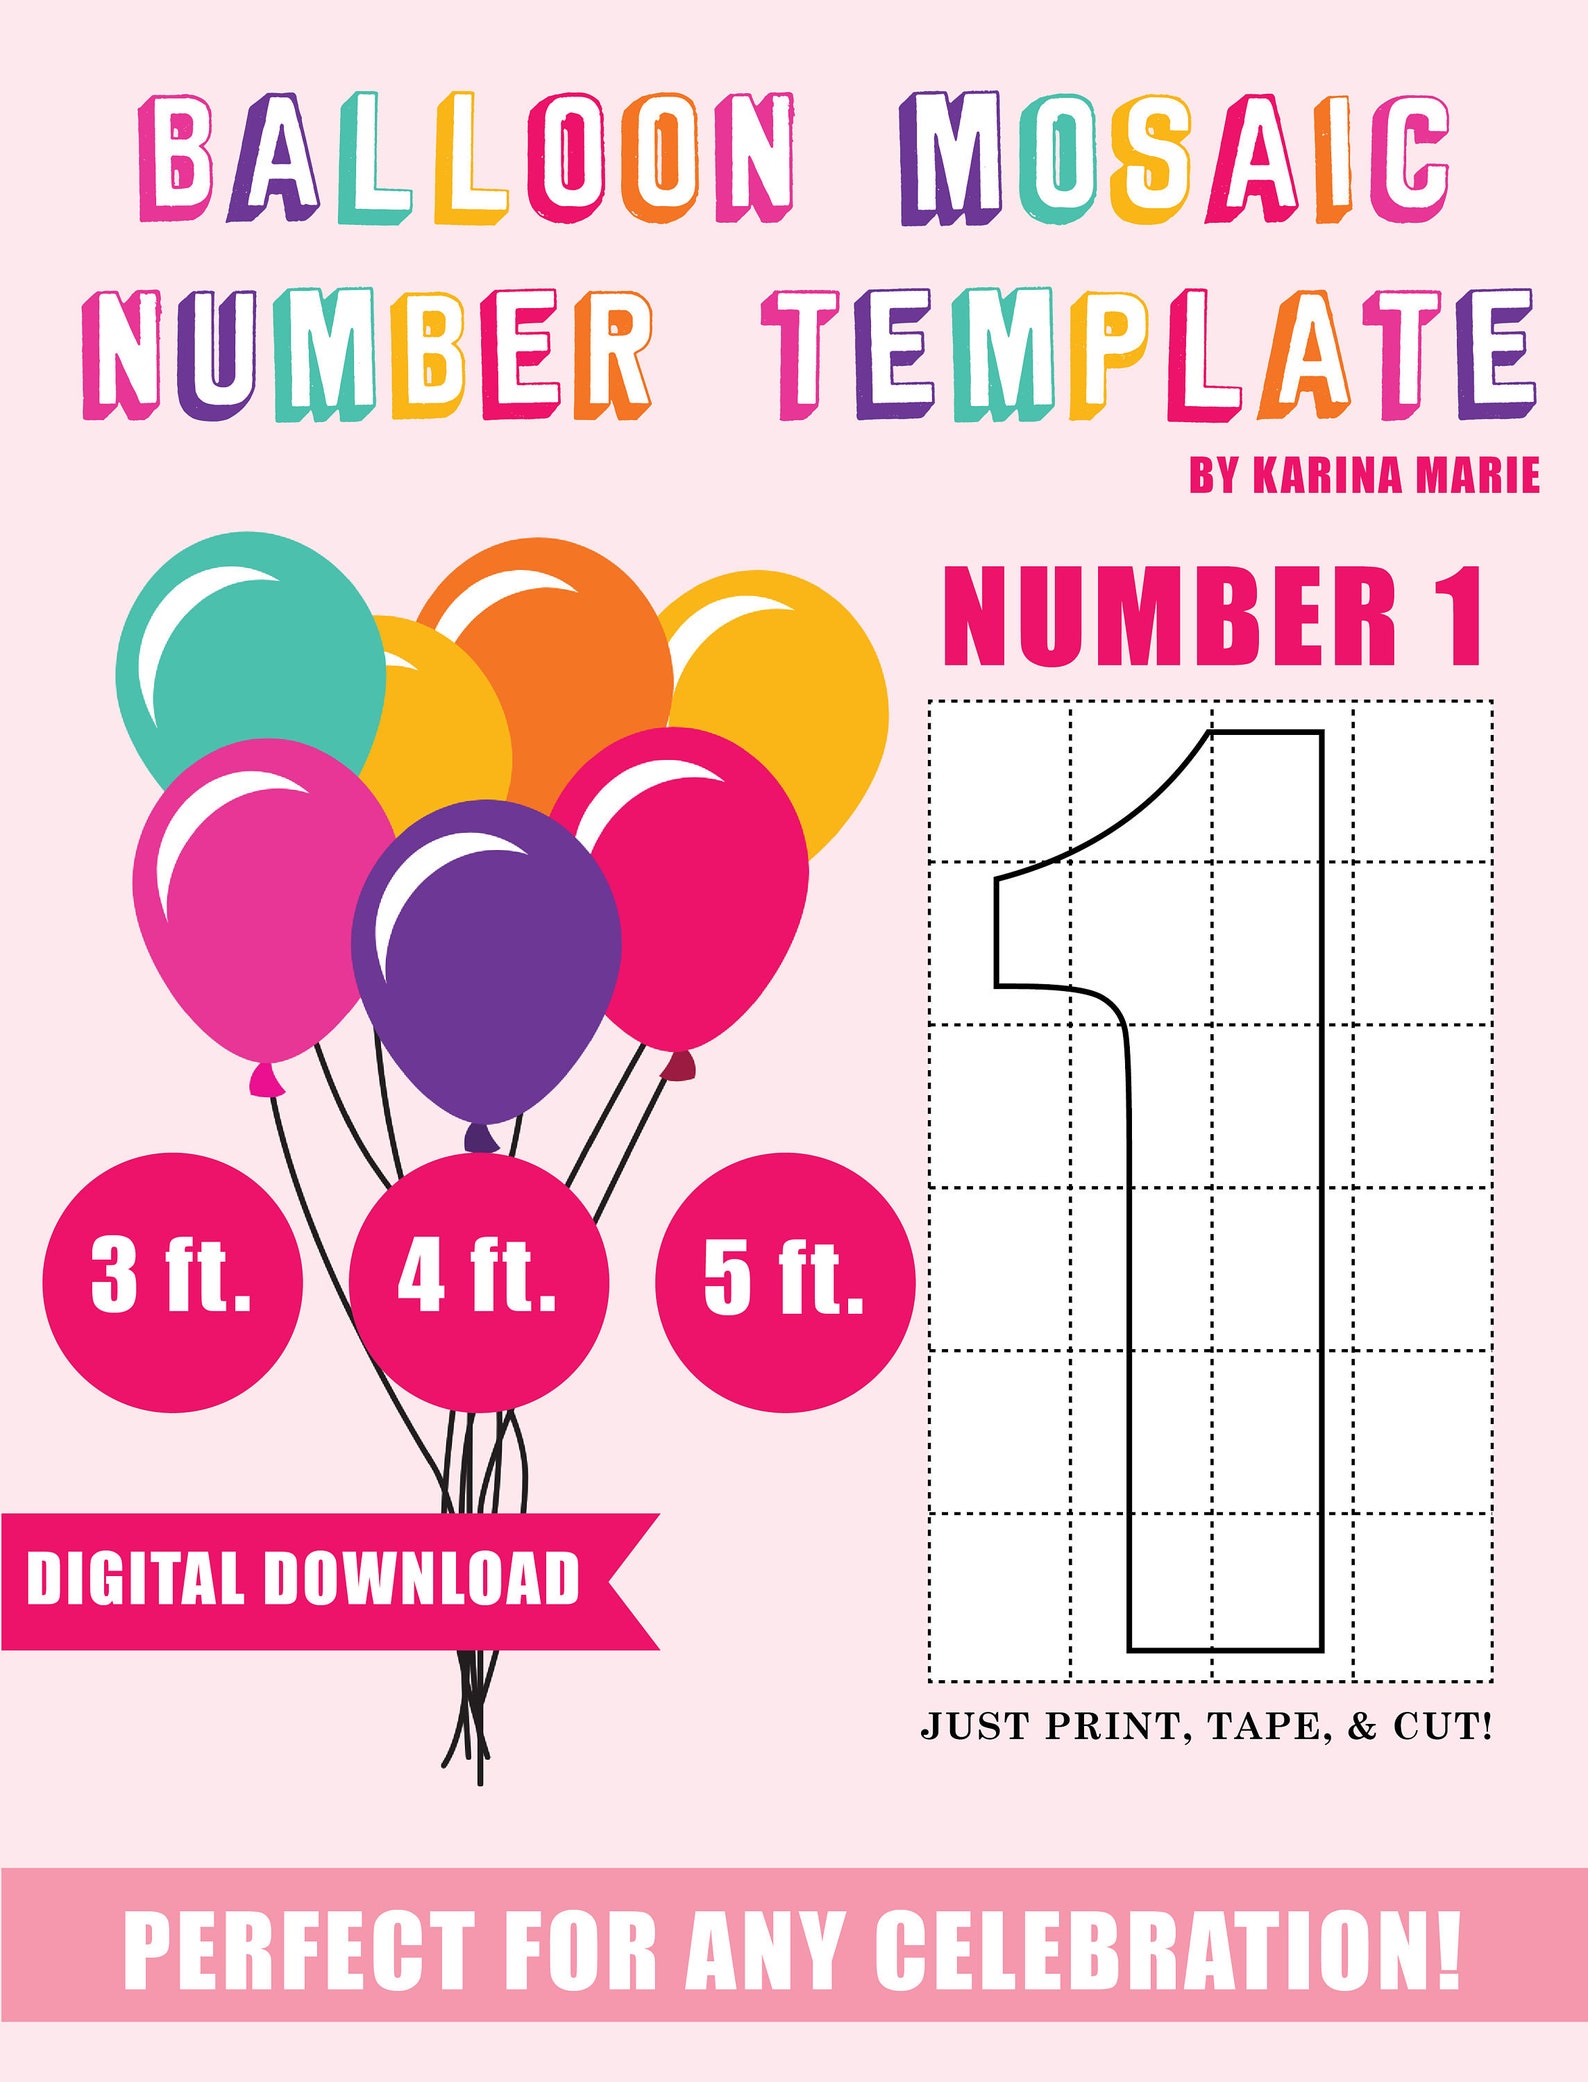 balloon-mosaic-number-template-number-1-diy-balloon-number-etsy